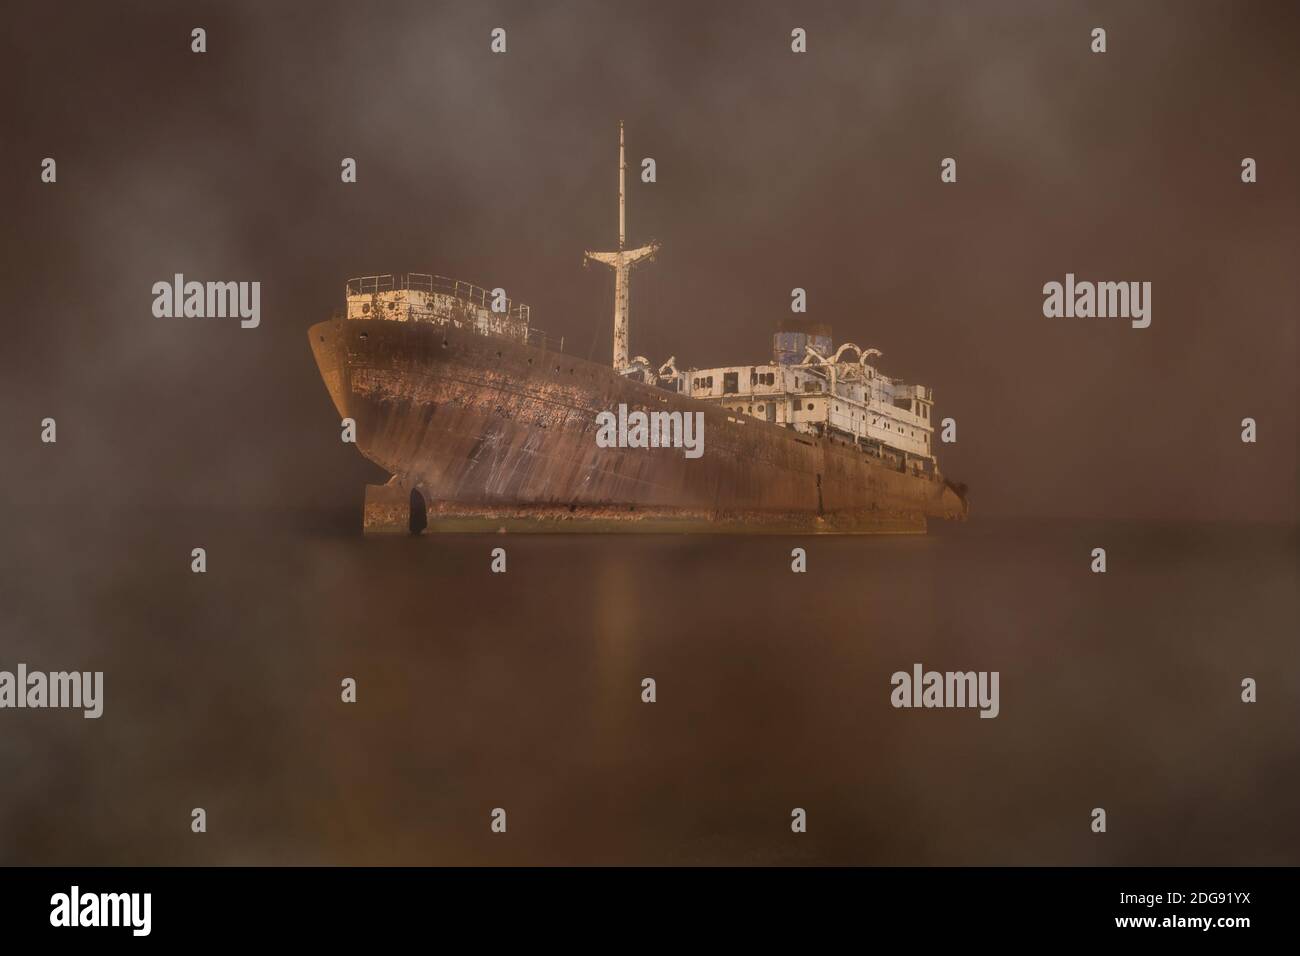 Gost ship in the myst Stock Photo